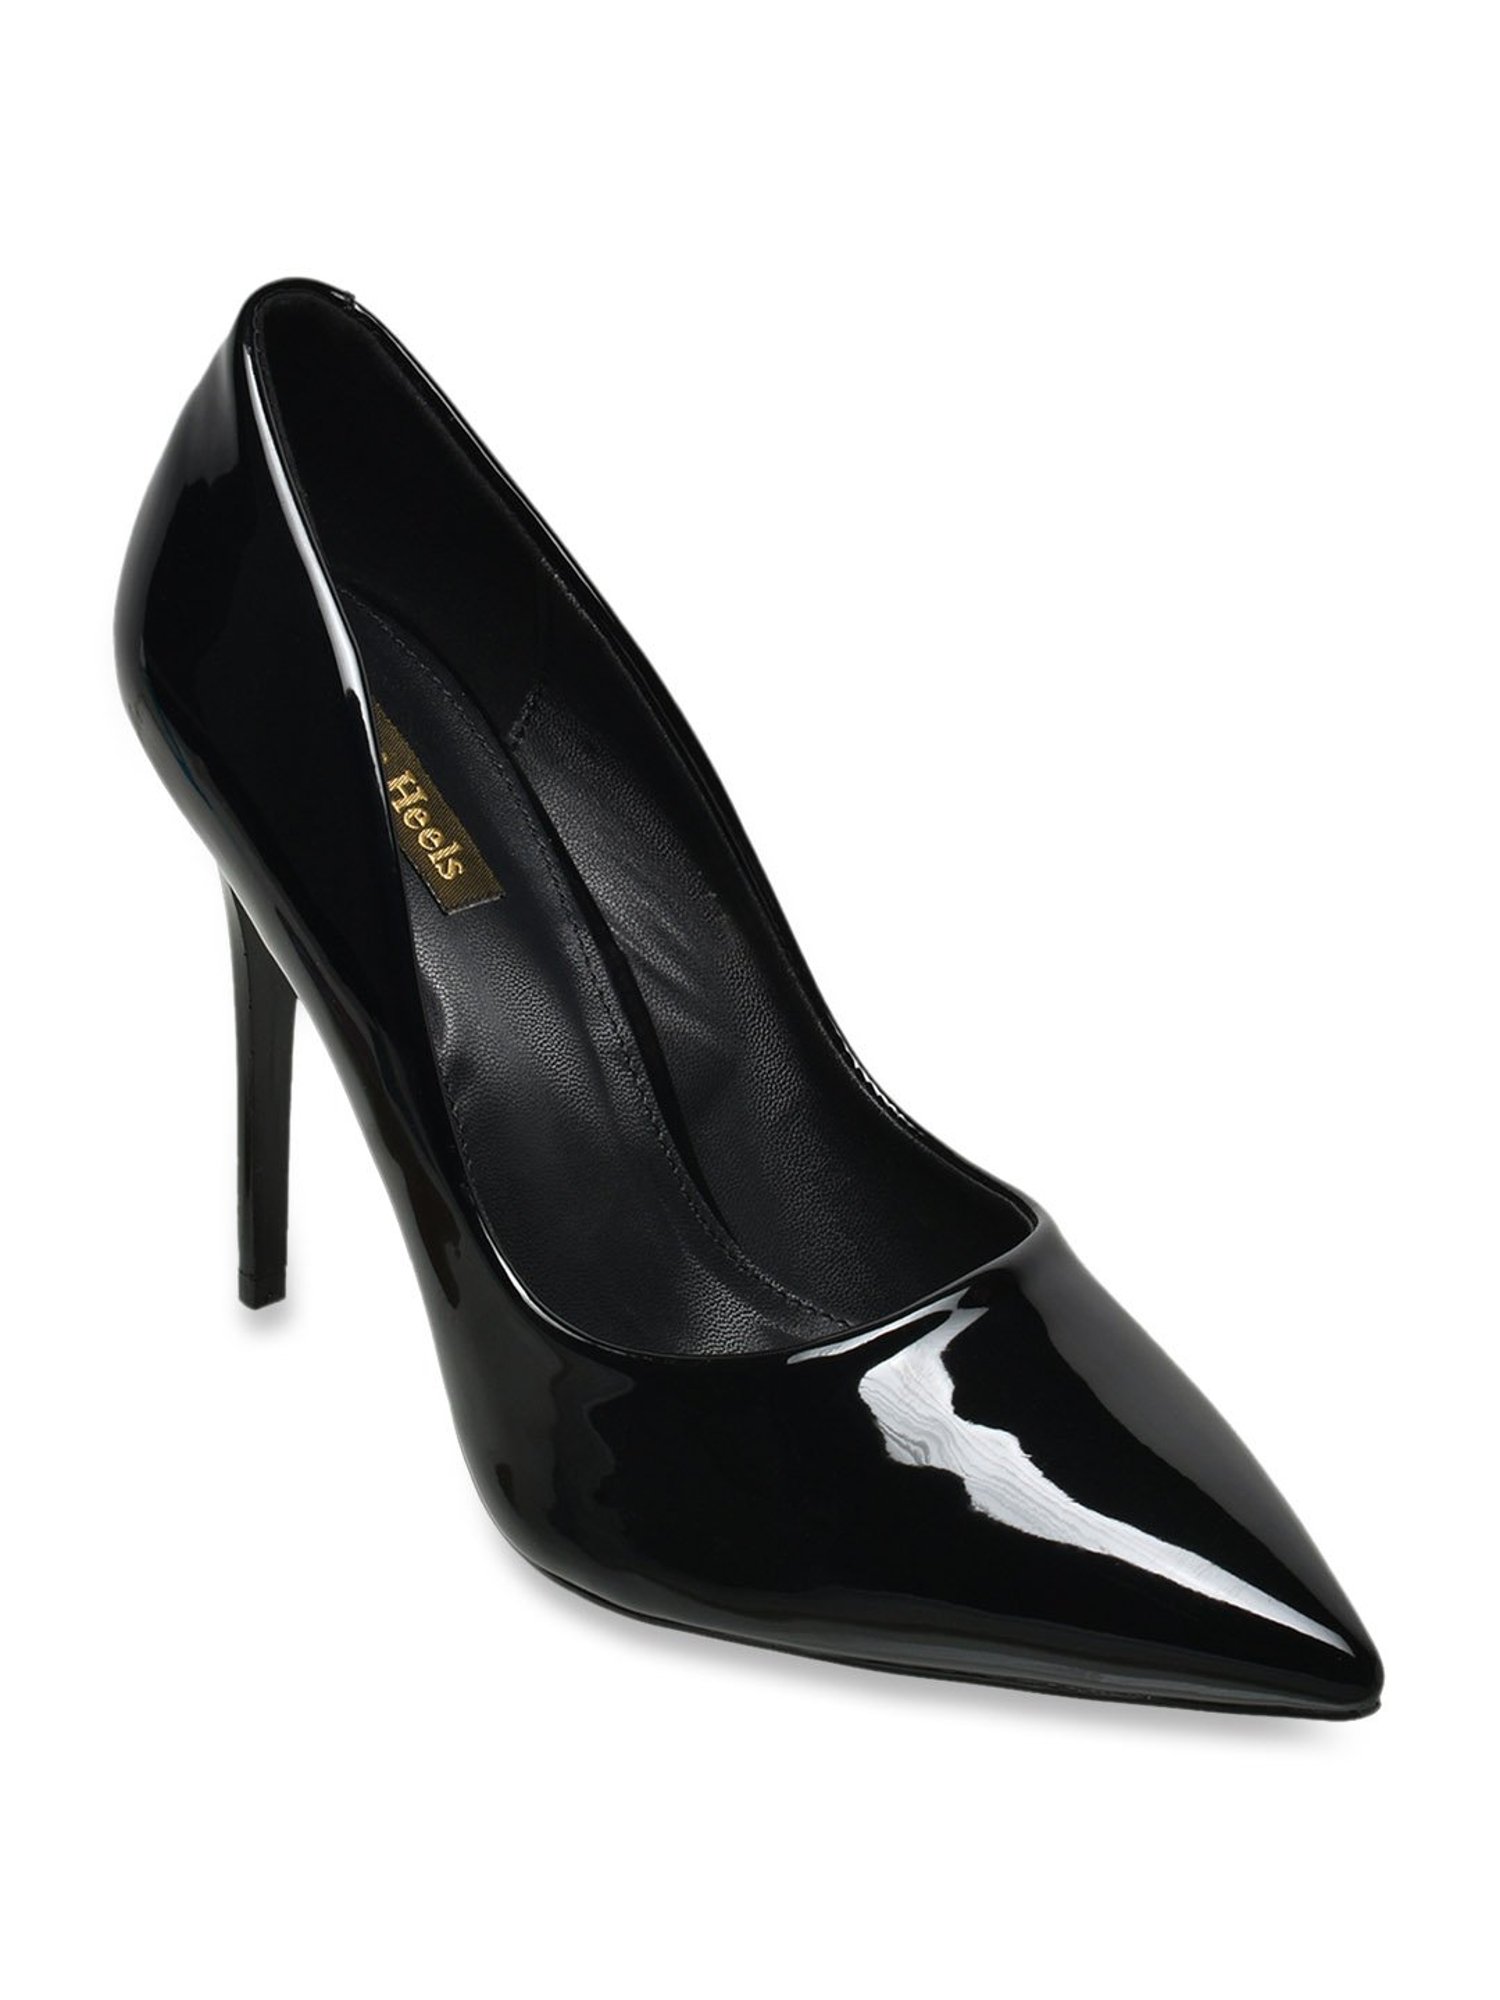 Buy Heel The World Women's Pumps Pointed Toe Dress High Heels Black 07 at  Amazon.in